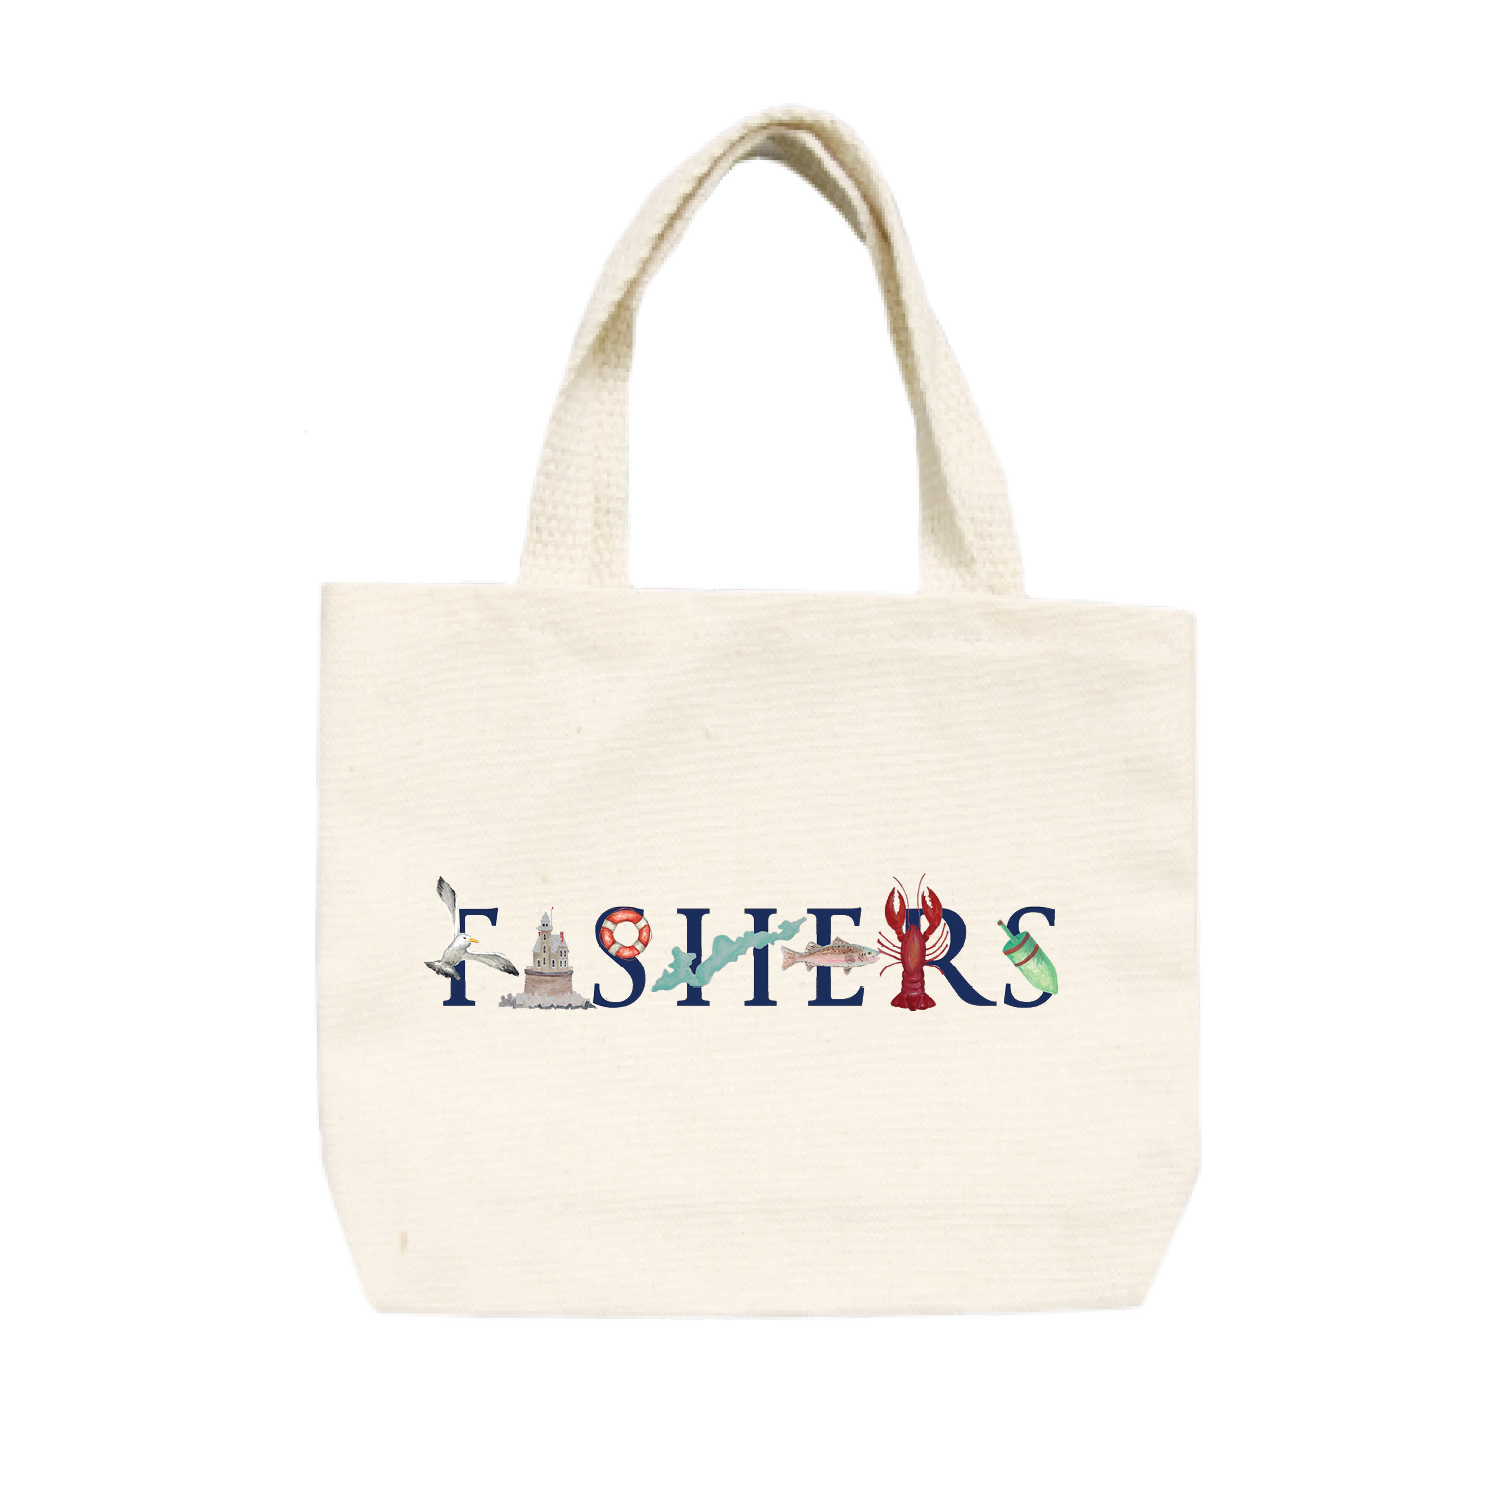 Fishers small tote